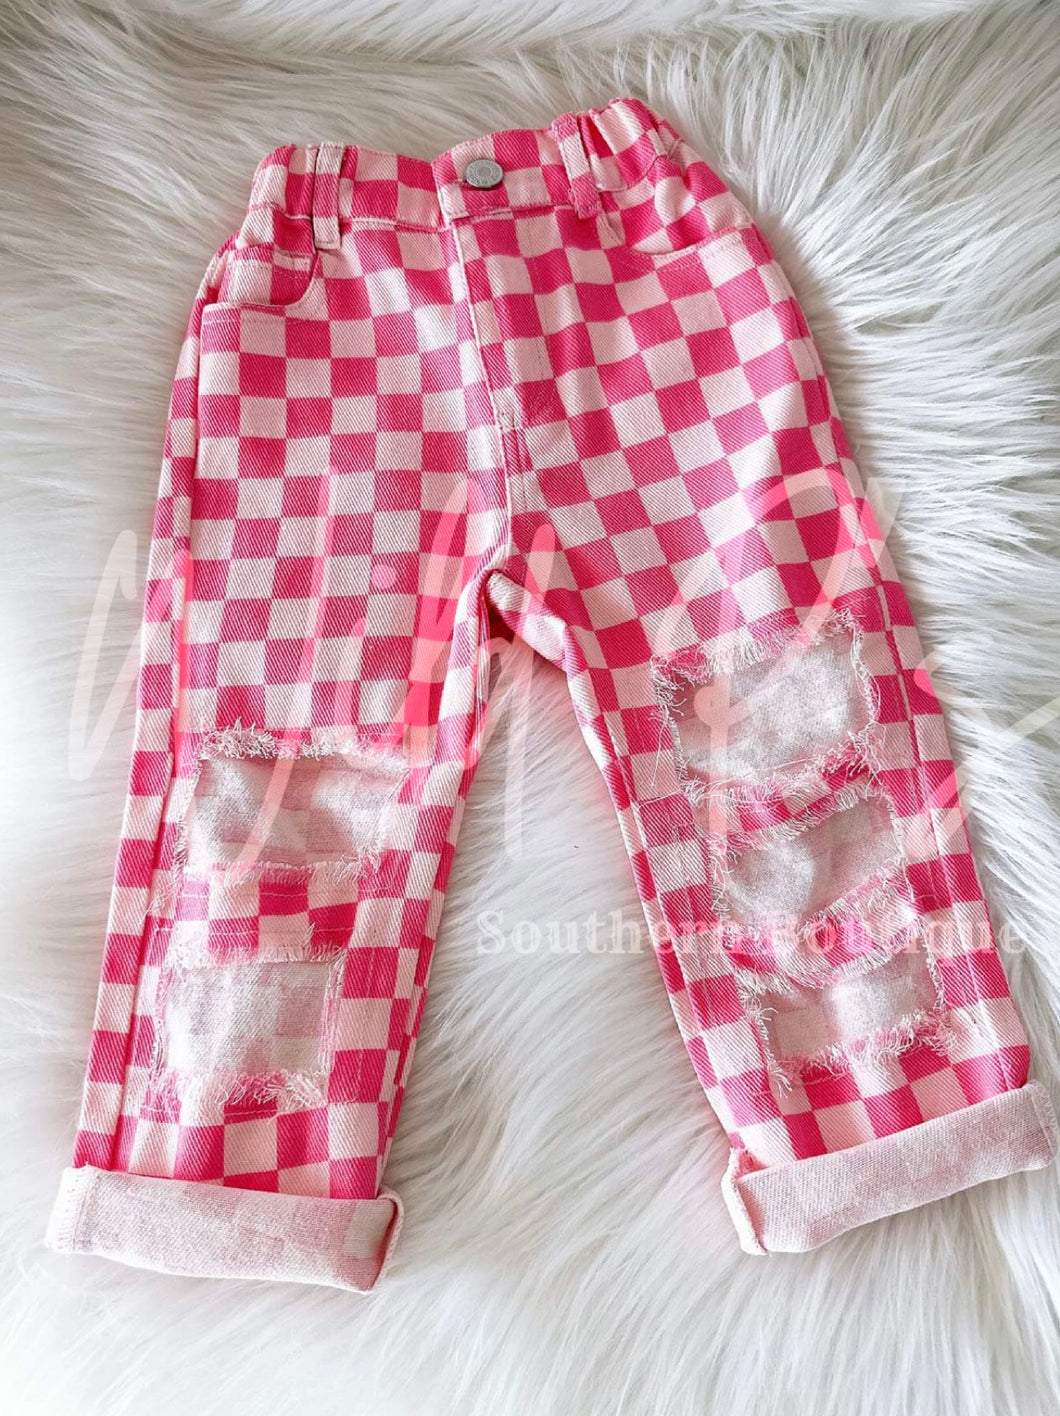 Distressed checkered pants